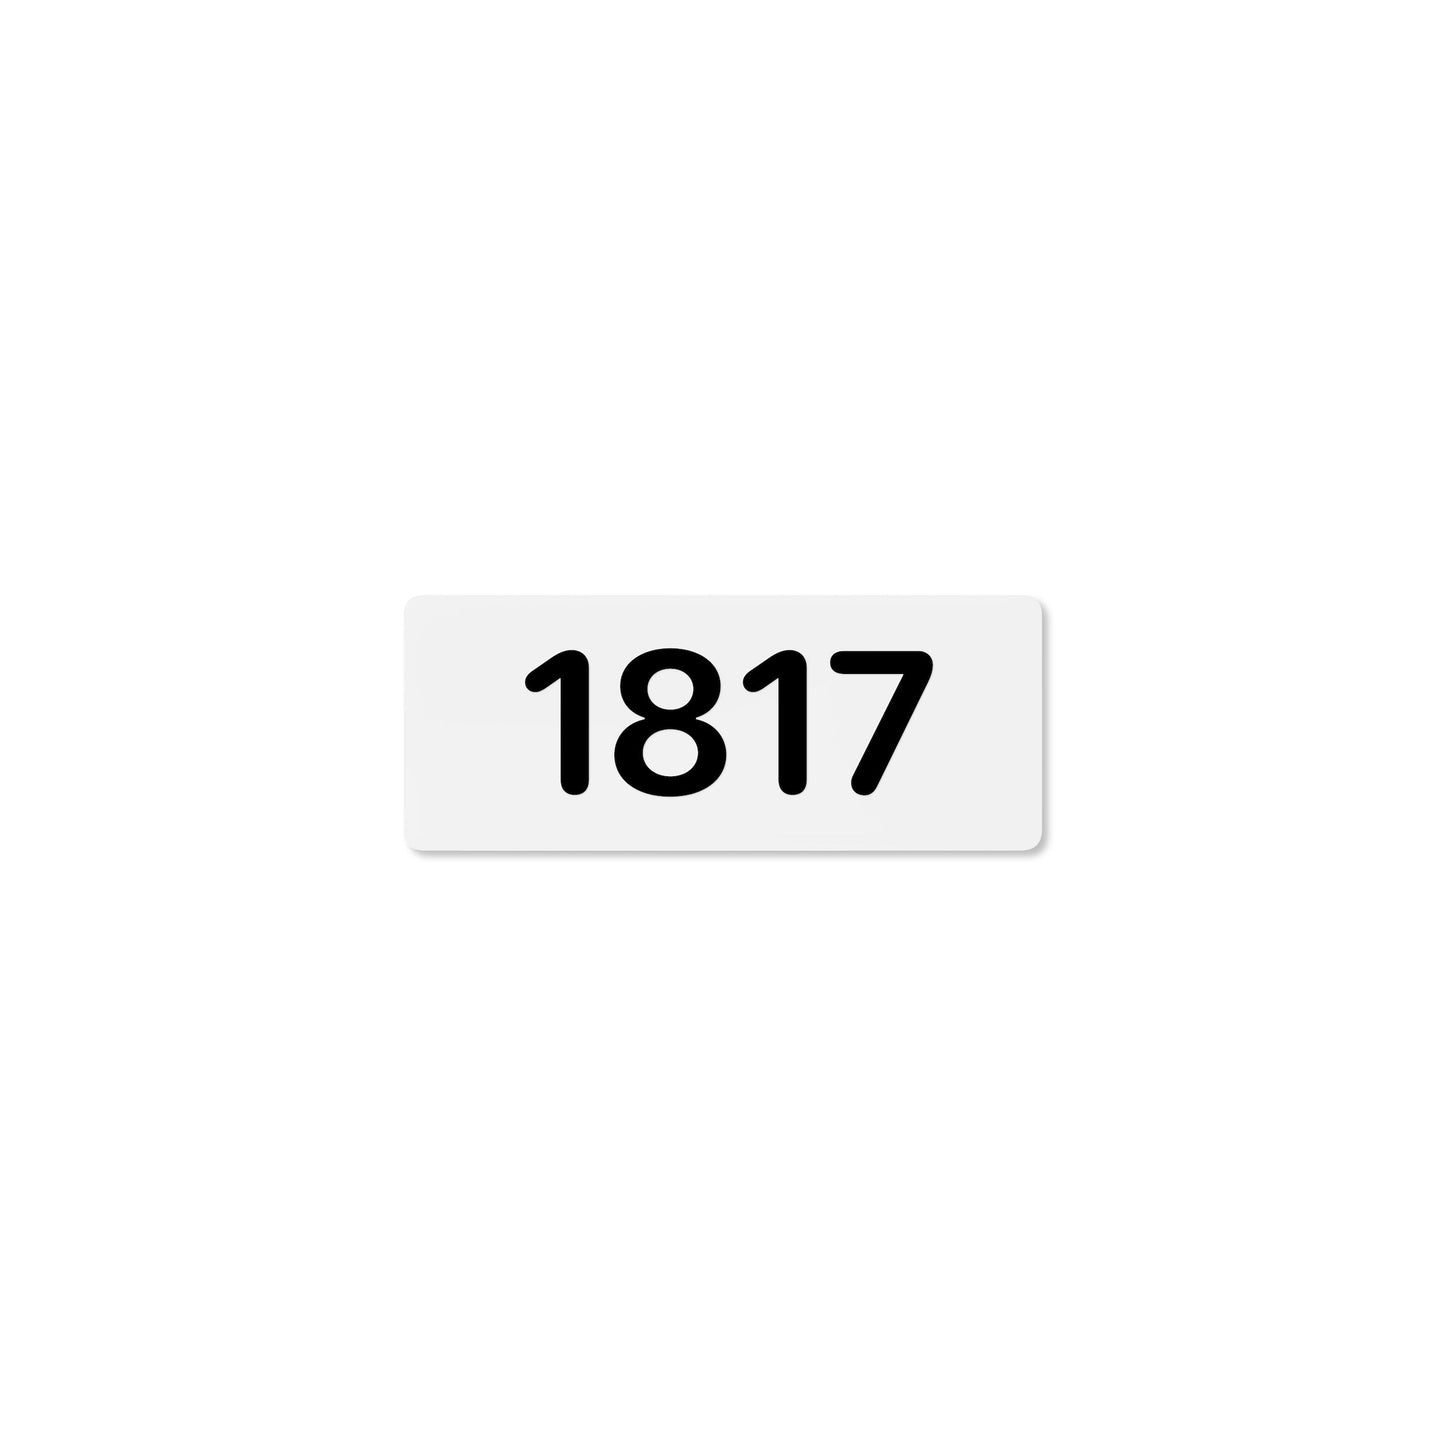 Numeral 1817